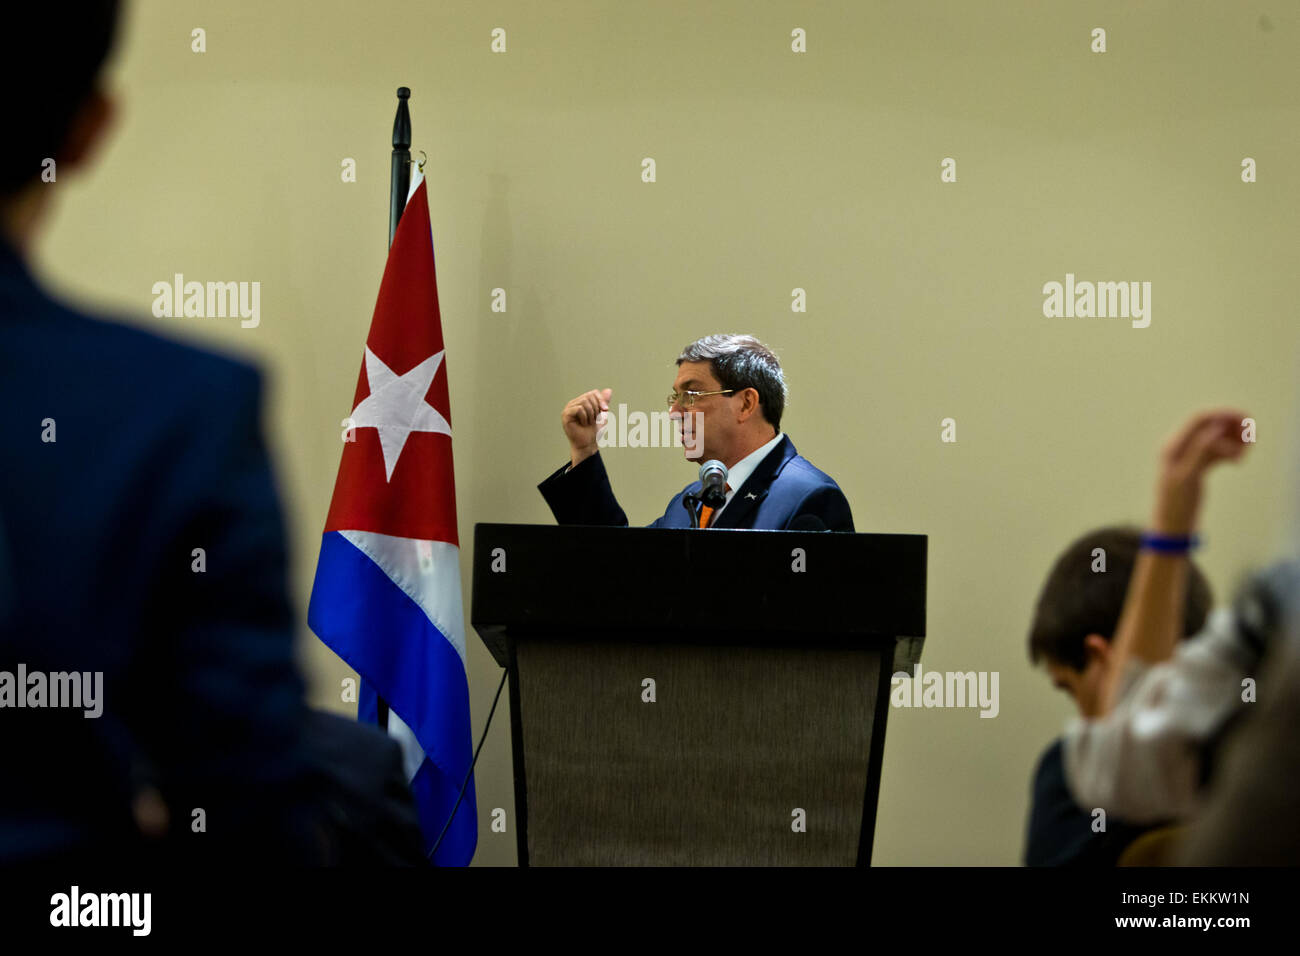 Panama City, Panama. 11th Apr, 2015. Cuban Foreign Minister Bruno Rodriguez speaks at a press conference in Panama City, capital of Panama, April 11, 2015. Cuban and U.S. presidents held the first face-to-face talks in over half a century on Saturday here amid detente between the two nations. Credit:  Liu Bin/Xinhua/Alamy Live News Stock Photo